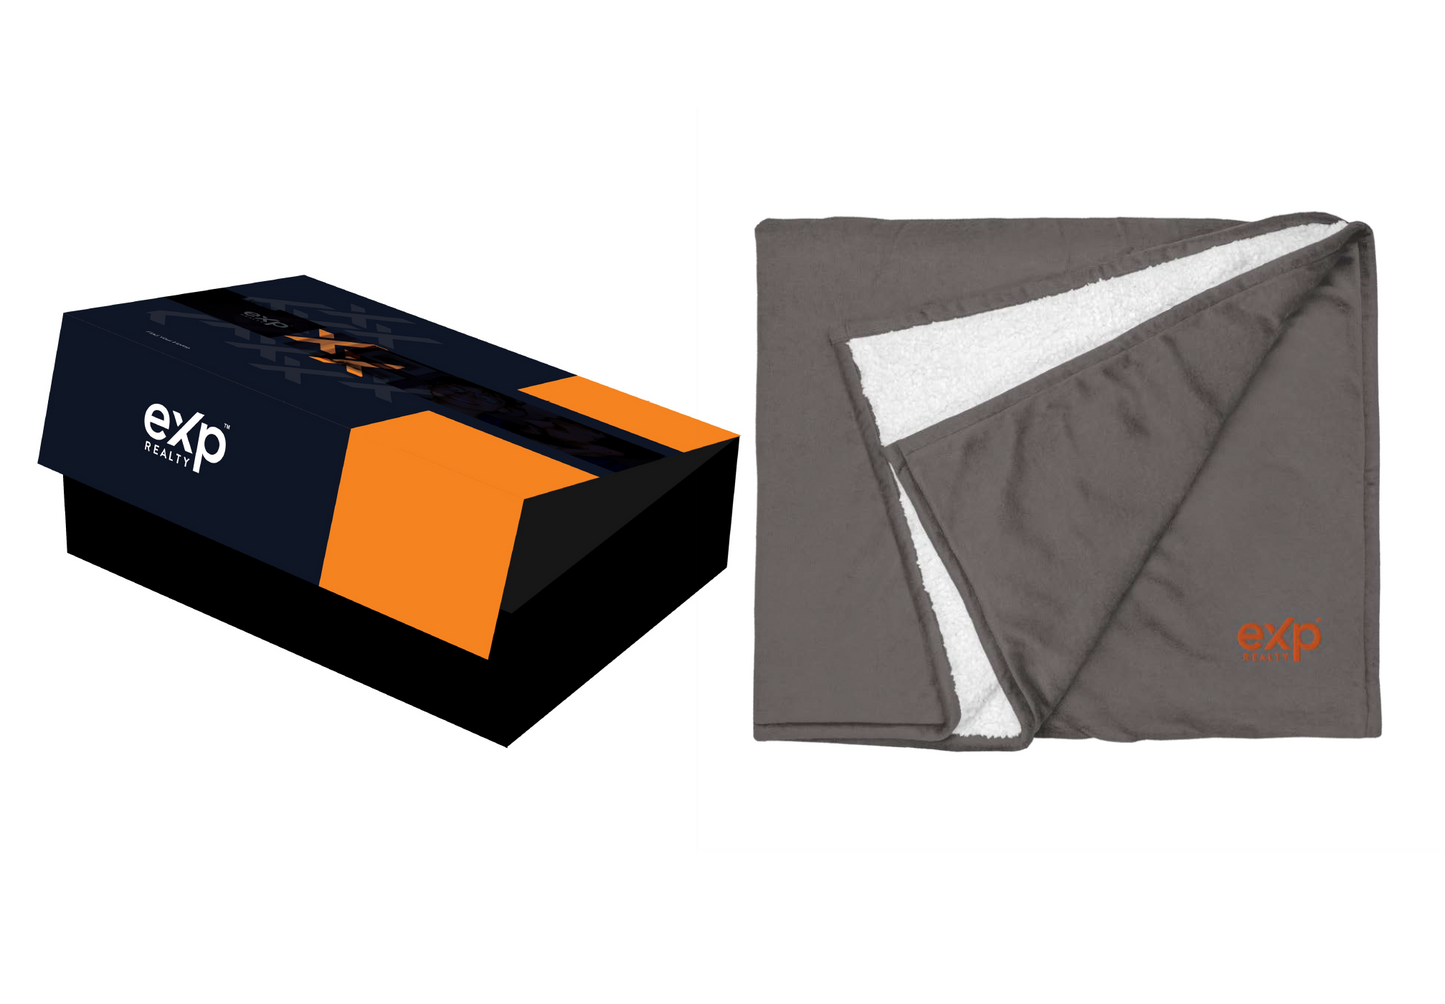 eXp Branded Closing Gift Box with eXp Branded Blanket (from $$91 per complete box)